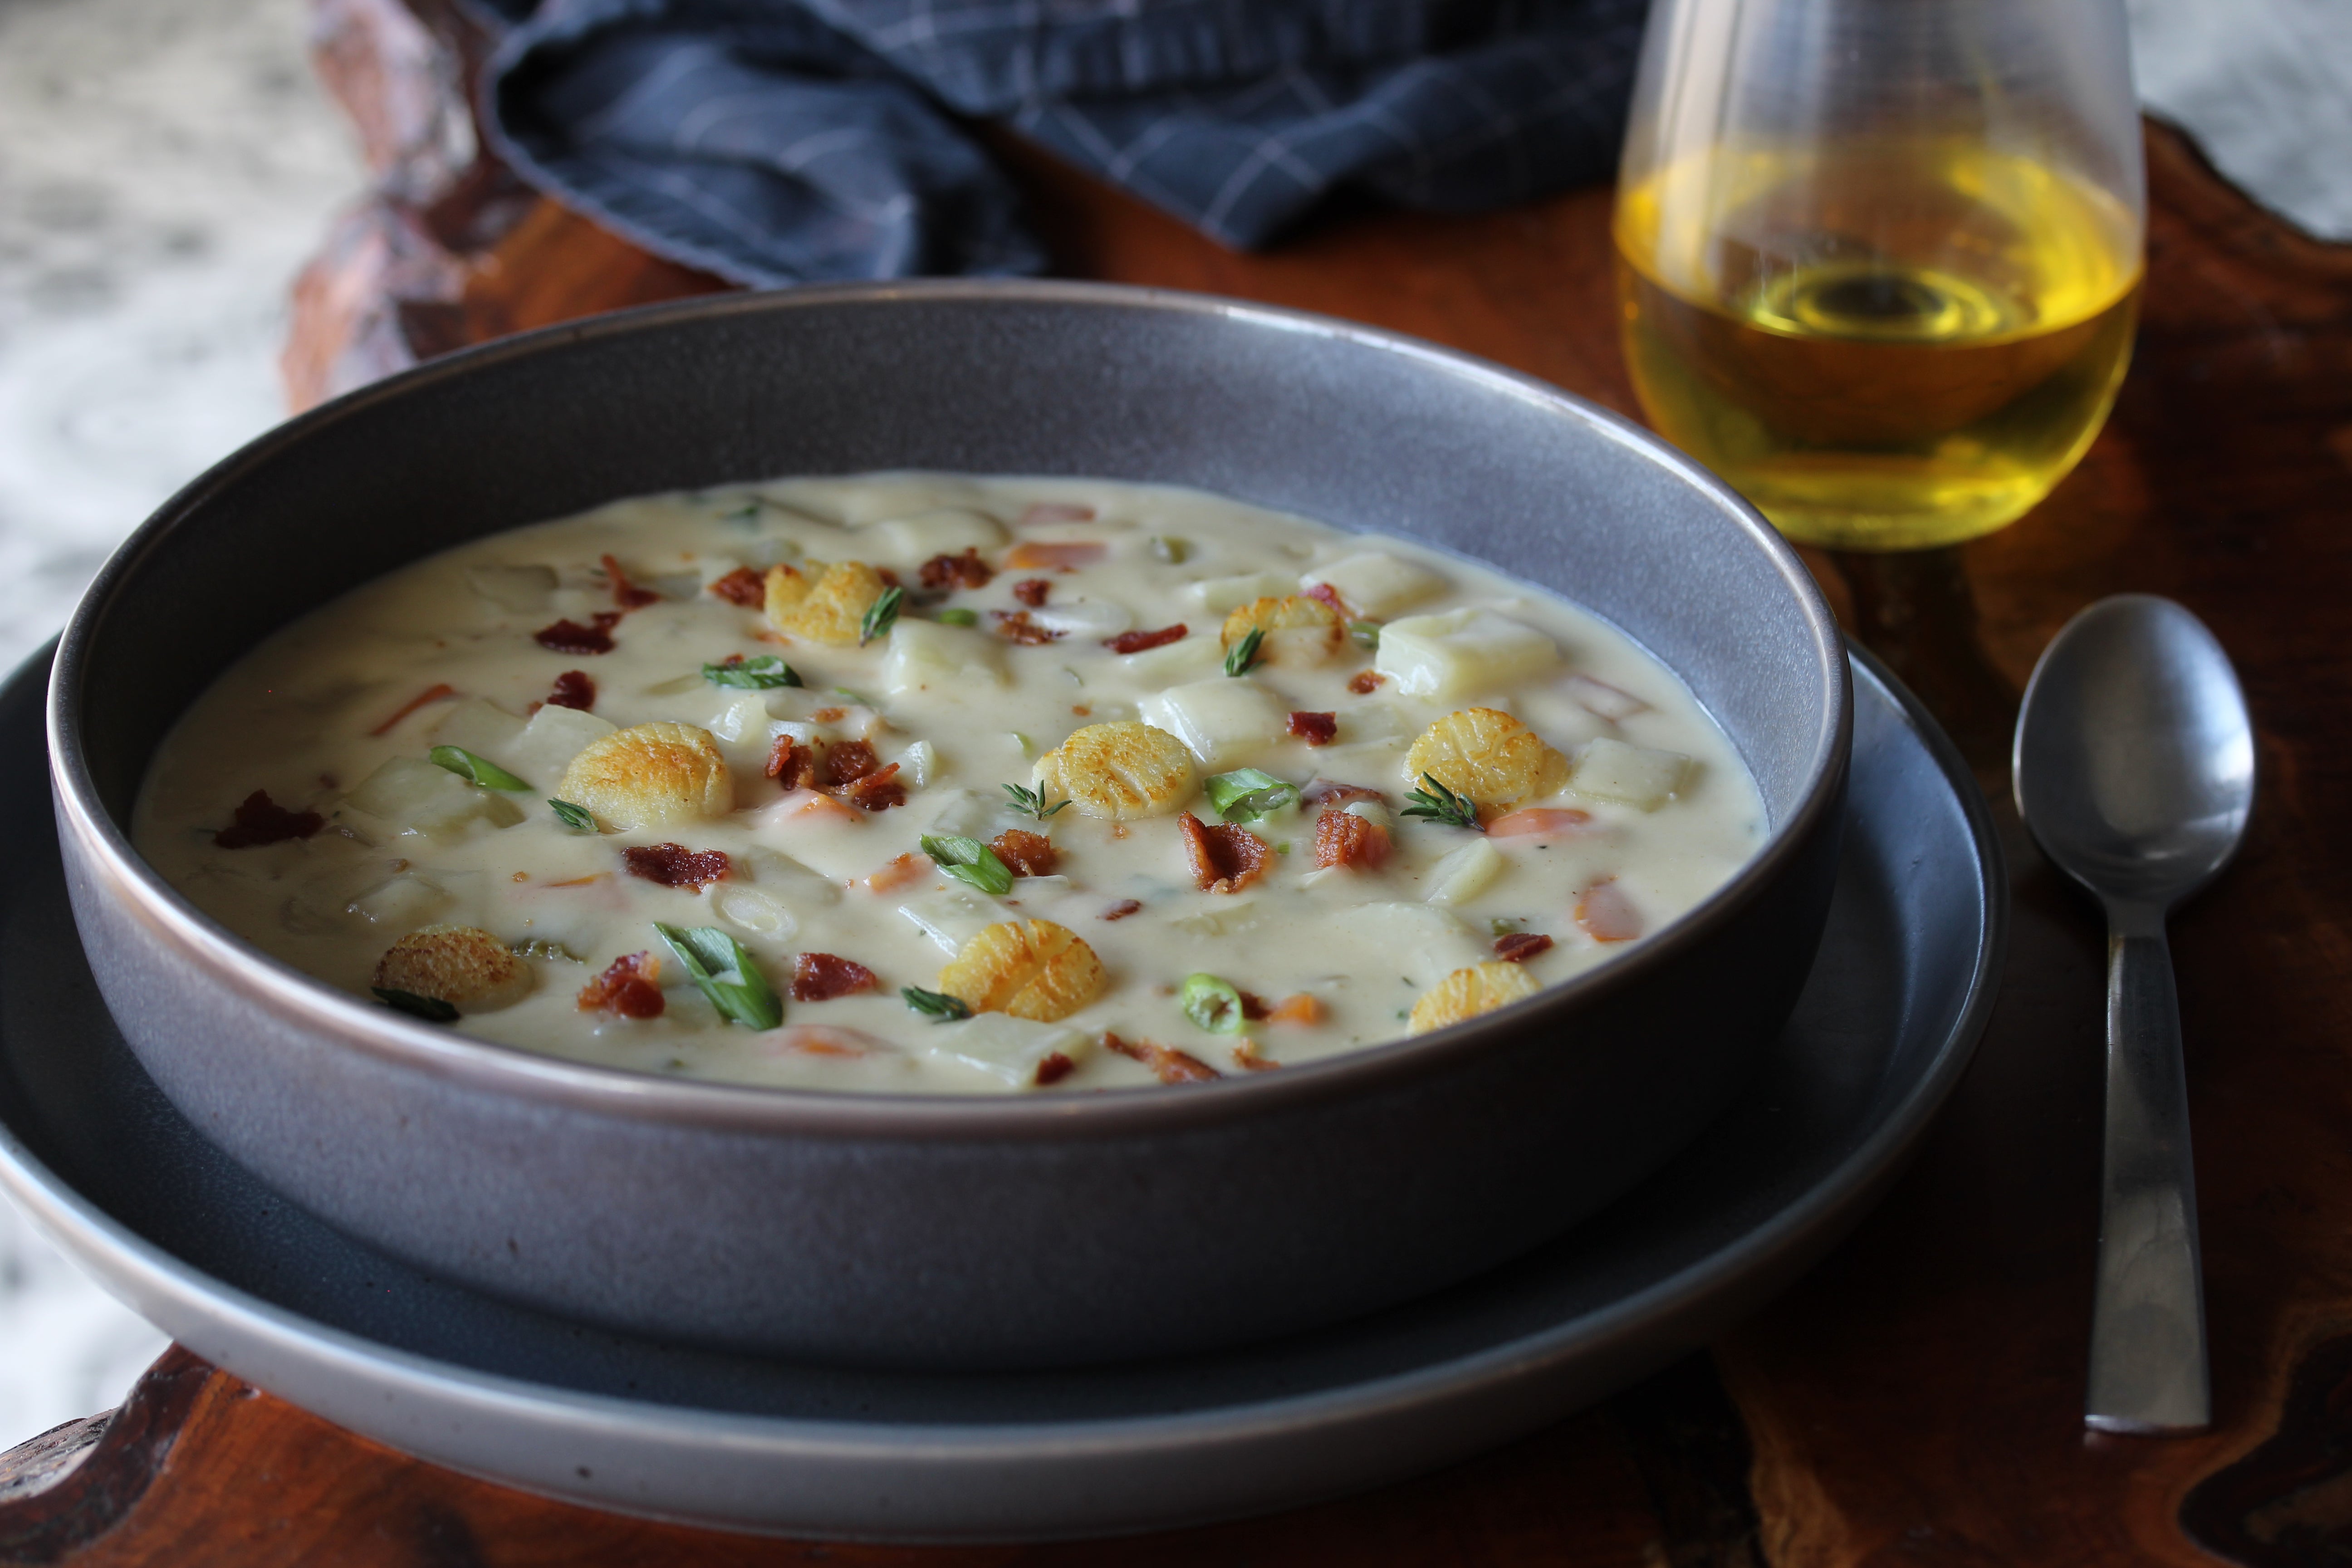 scallop bacon chowder with white wine